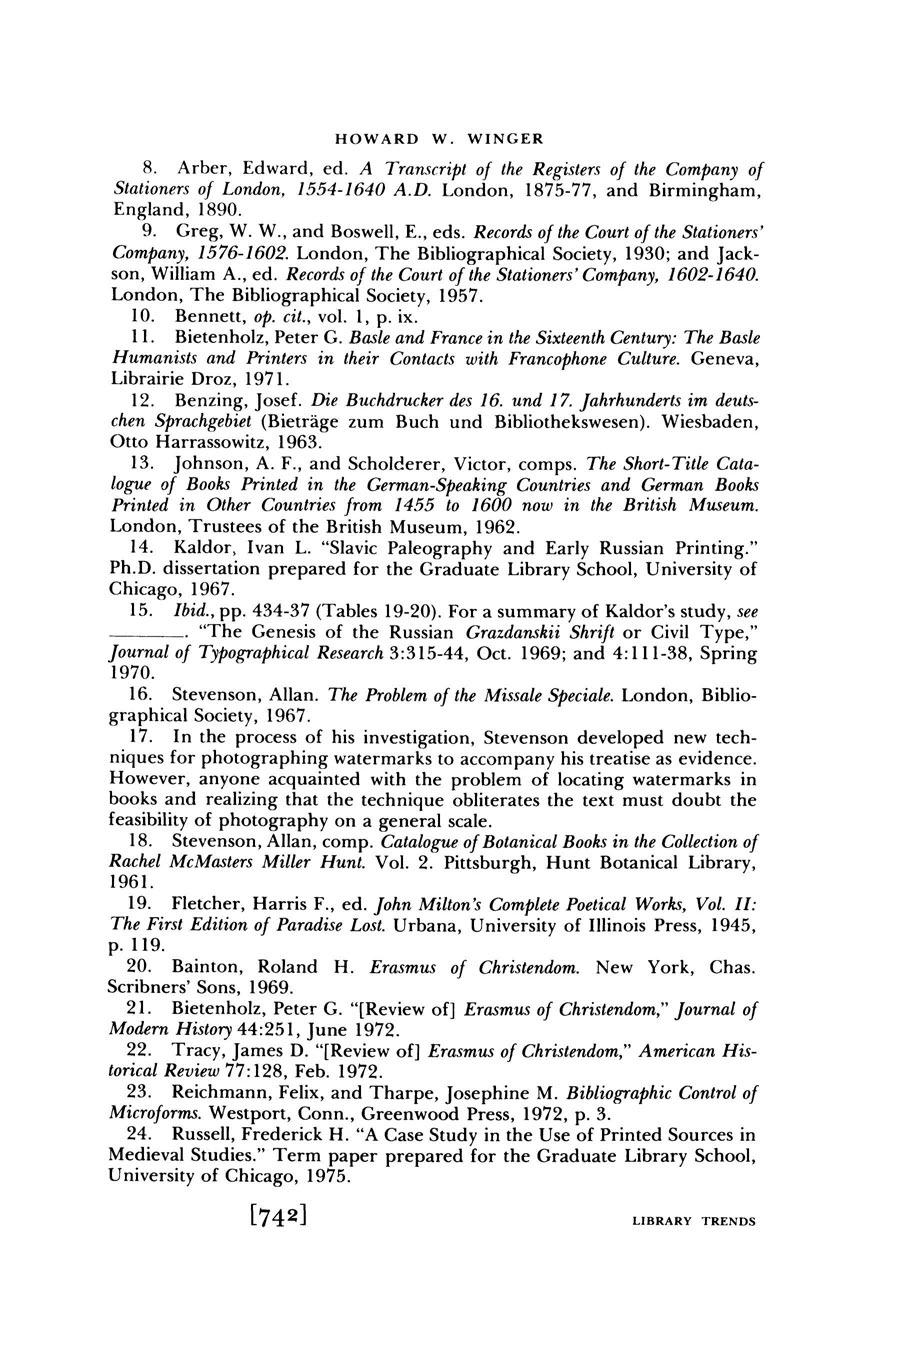 HOWARD W. WINGER 8. Arber, Edward, ed. A Transcript of the Registers of the Company of Stationers of London, 1.554-1640 A.D. London, 1875-77, and Birmingham, England, 1890. 9. Greg, W. W., and Boswell, E.